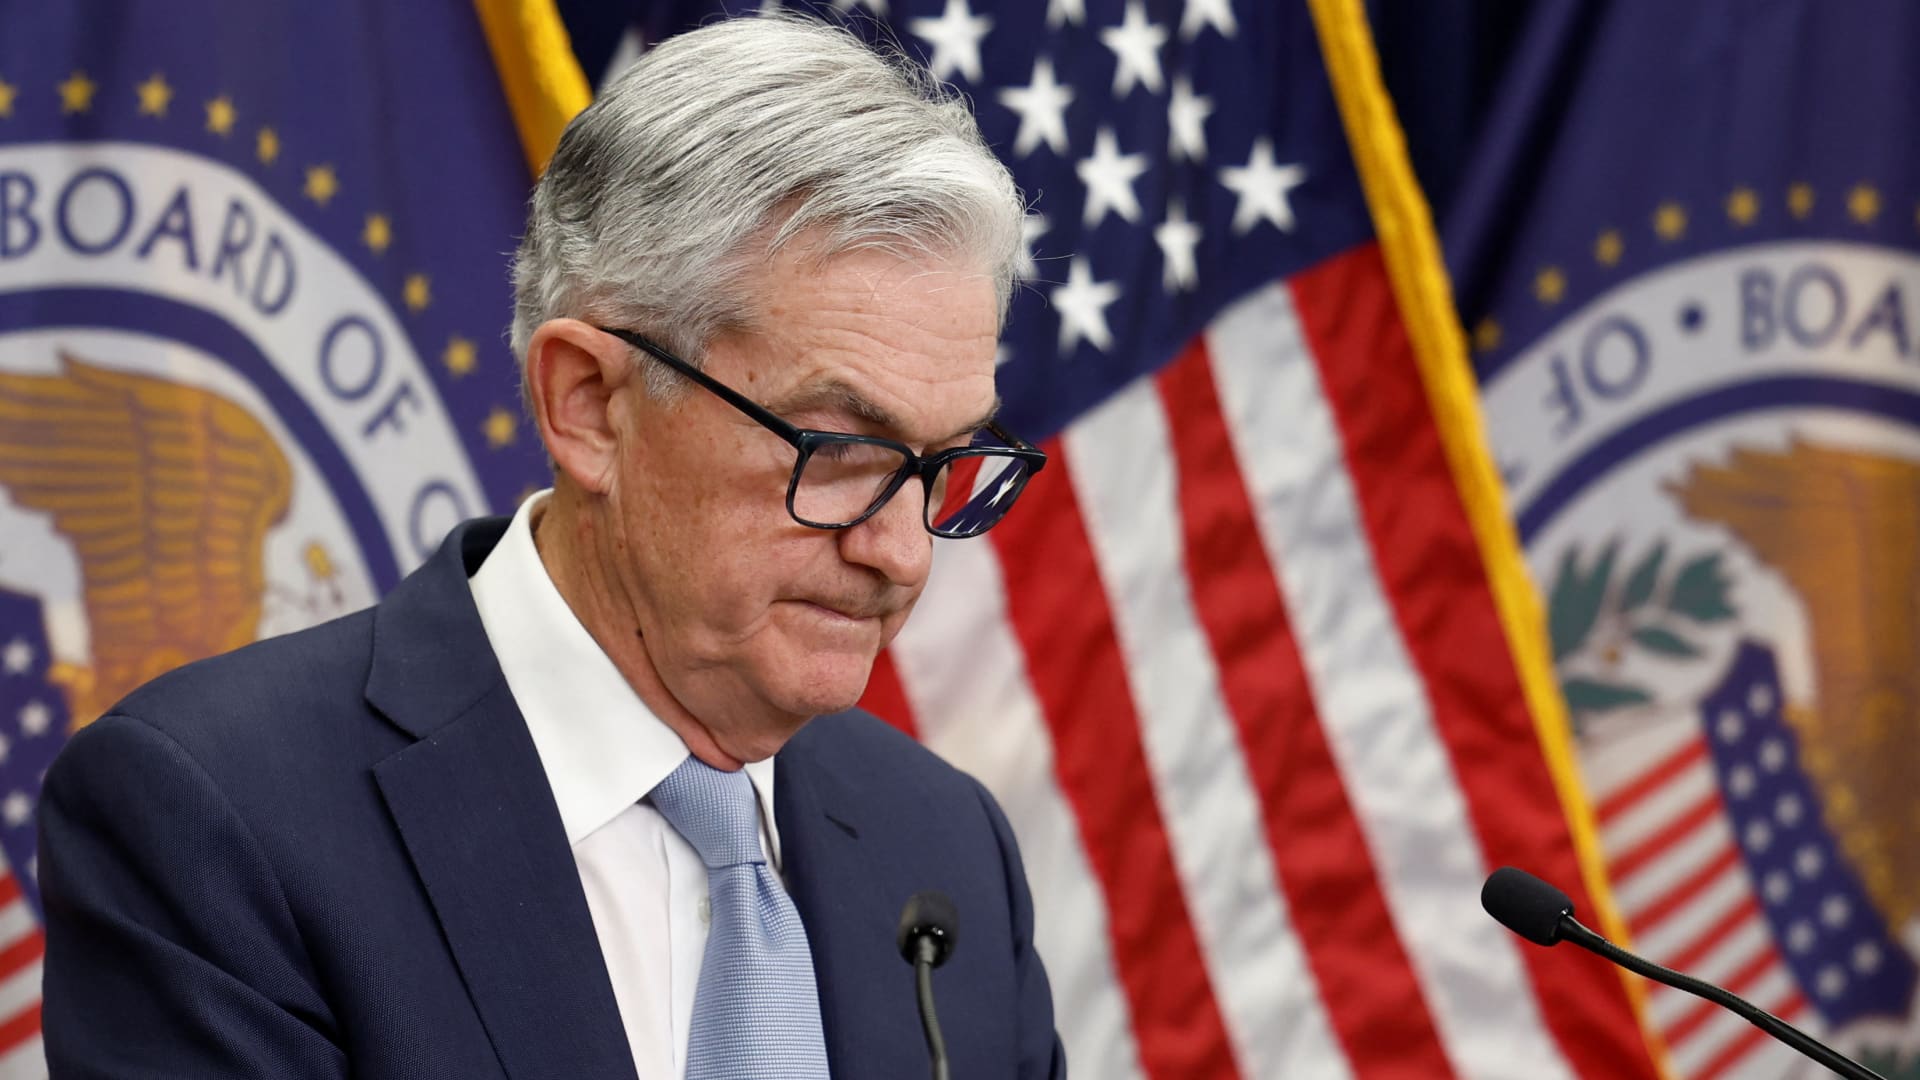 Here’s everything the Fed is expected to do Wednesday